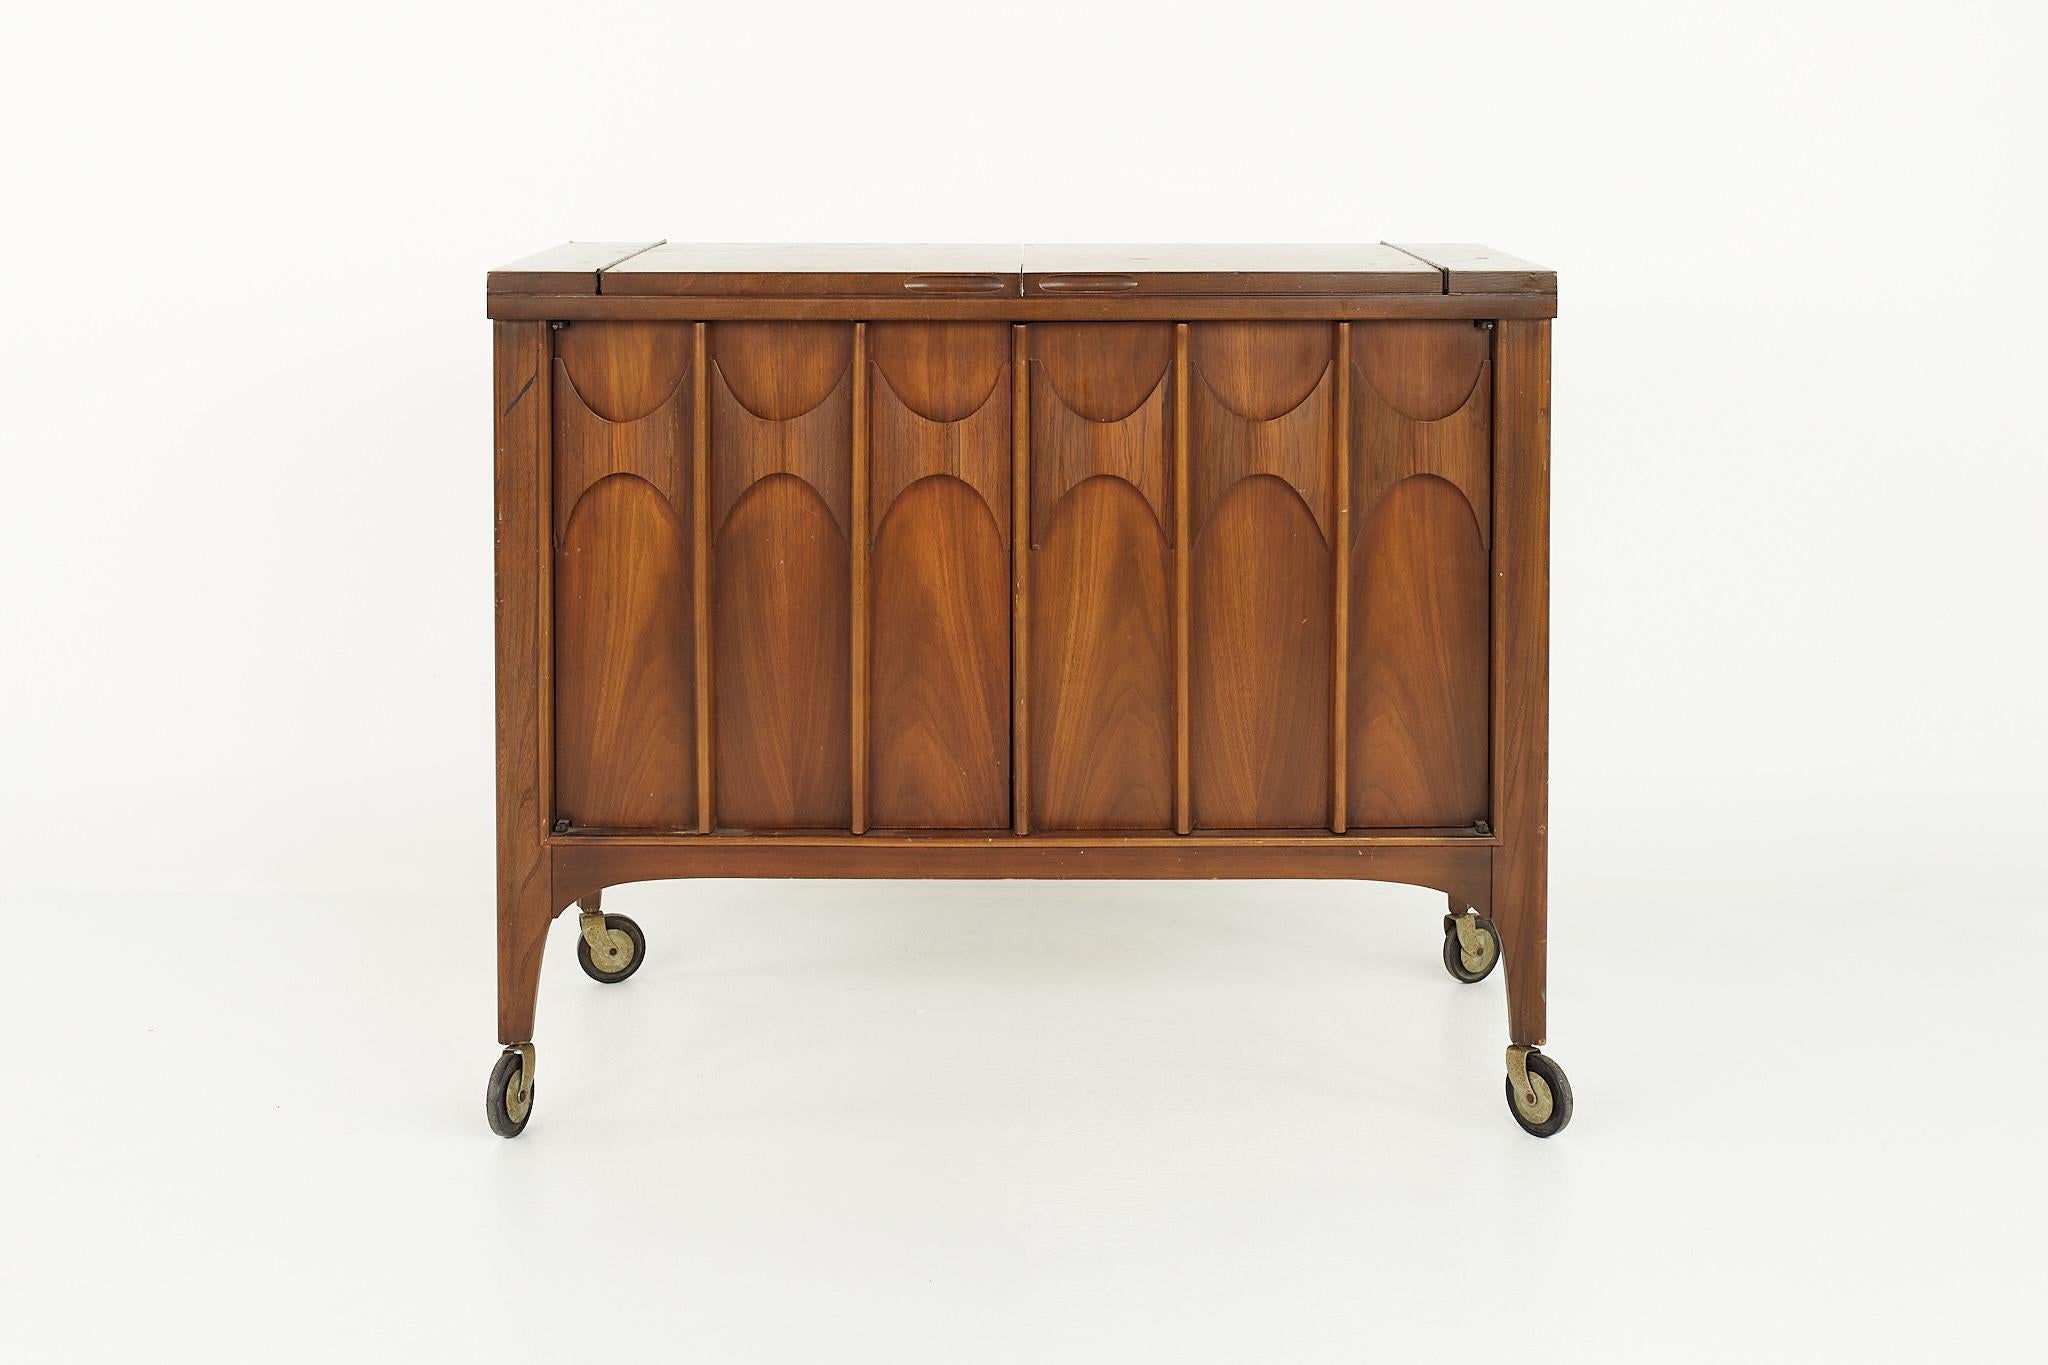 Kent Coffey Perspecta mid century walnut and rosewood bar cart

This cart measures: 39 wide x 18.5 deep x 32.25 inches high

?All pieces of furniture can be had in what we call restored vintage condition. That means the piece is restored upon